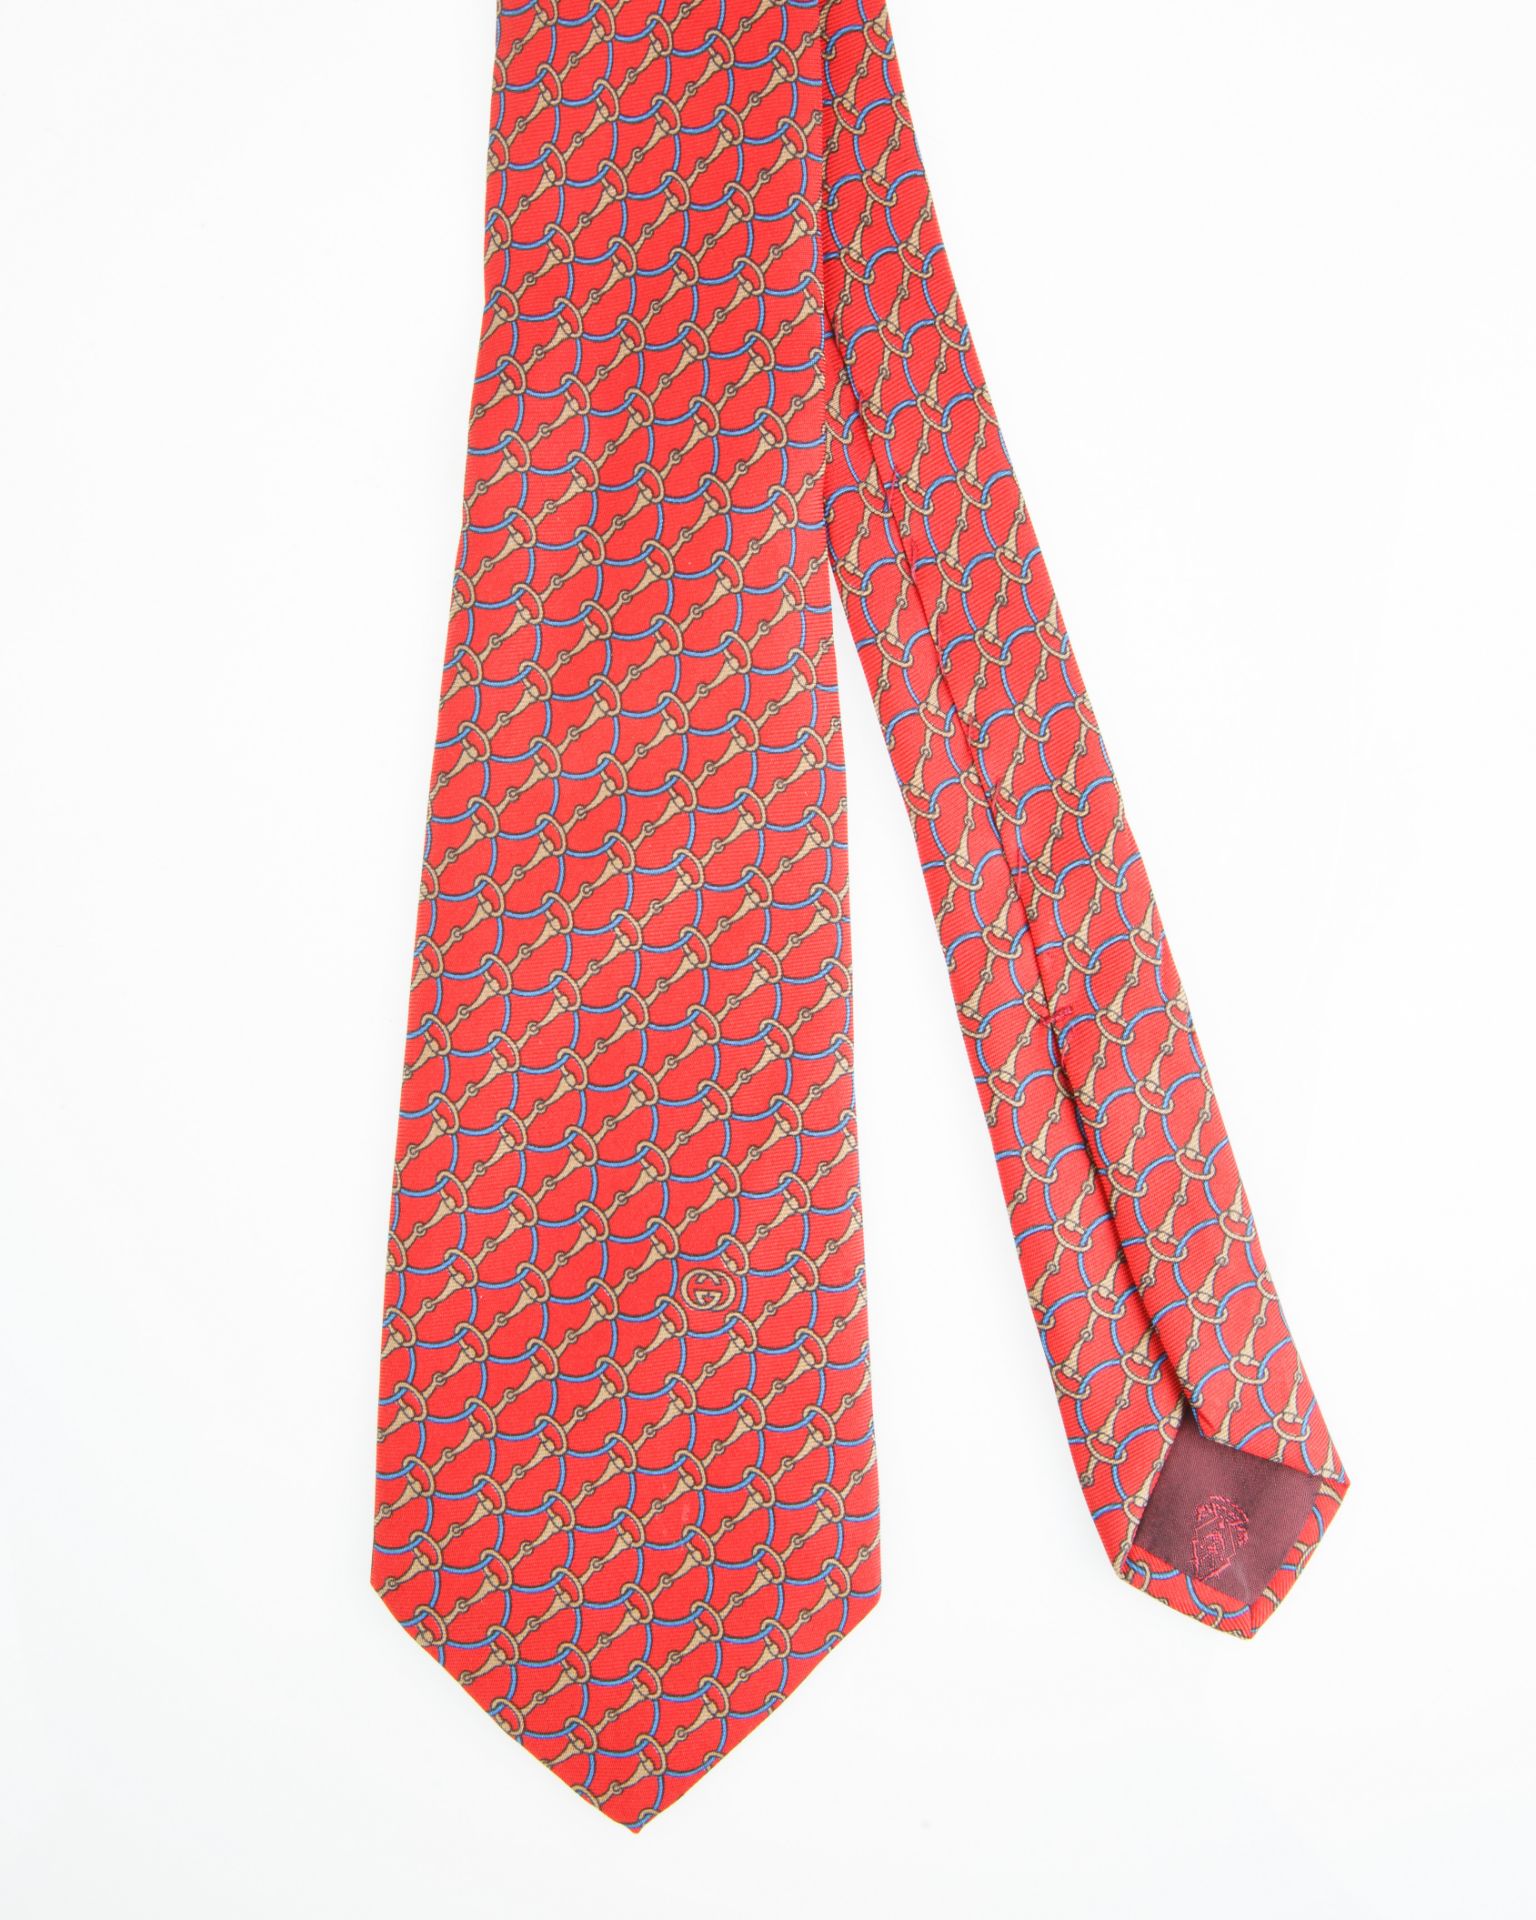 GROUP OF SEVEN GUCCI TIES - Image 2 of 15